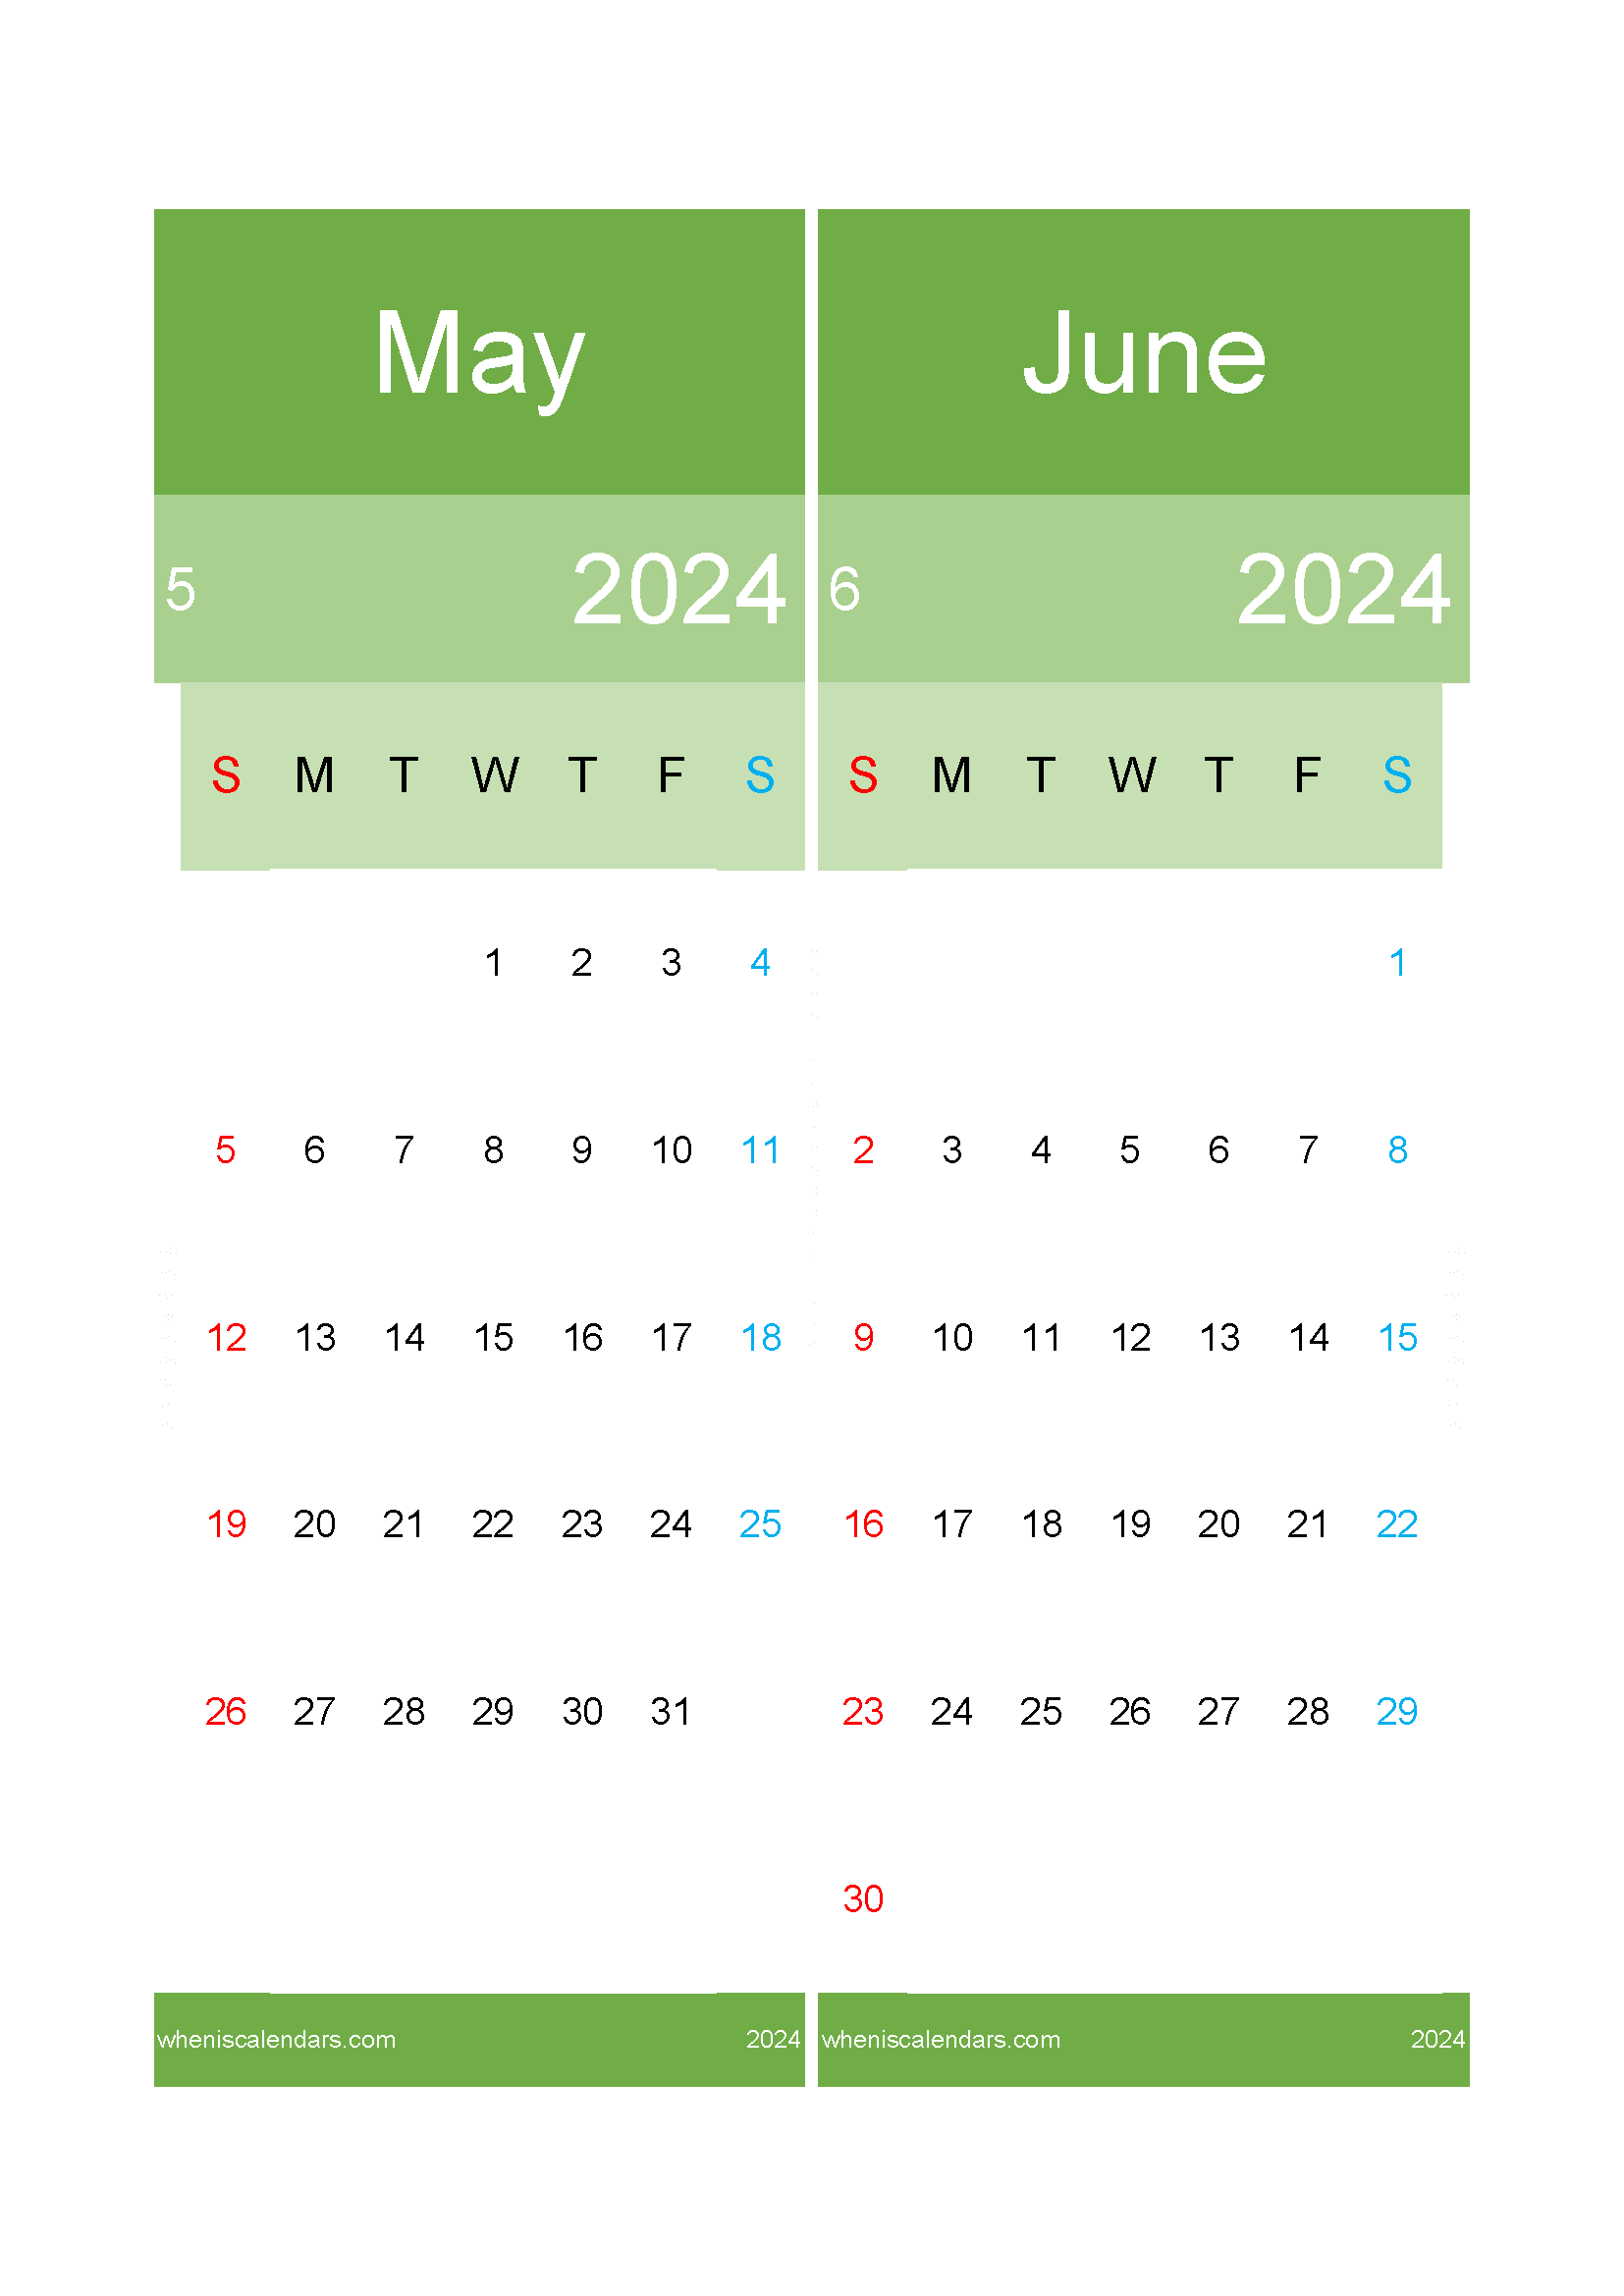 Download calendar for May and June 2024 A4 MJ242030